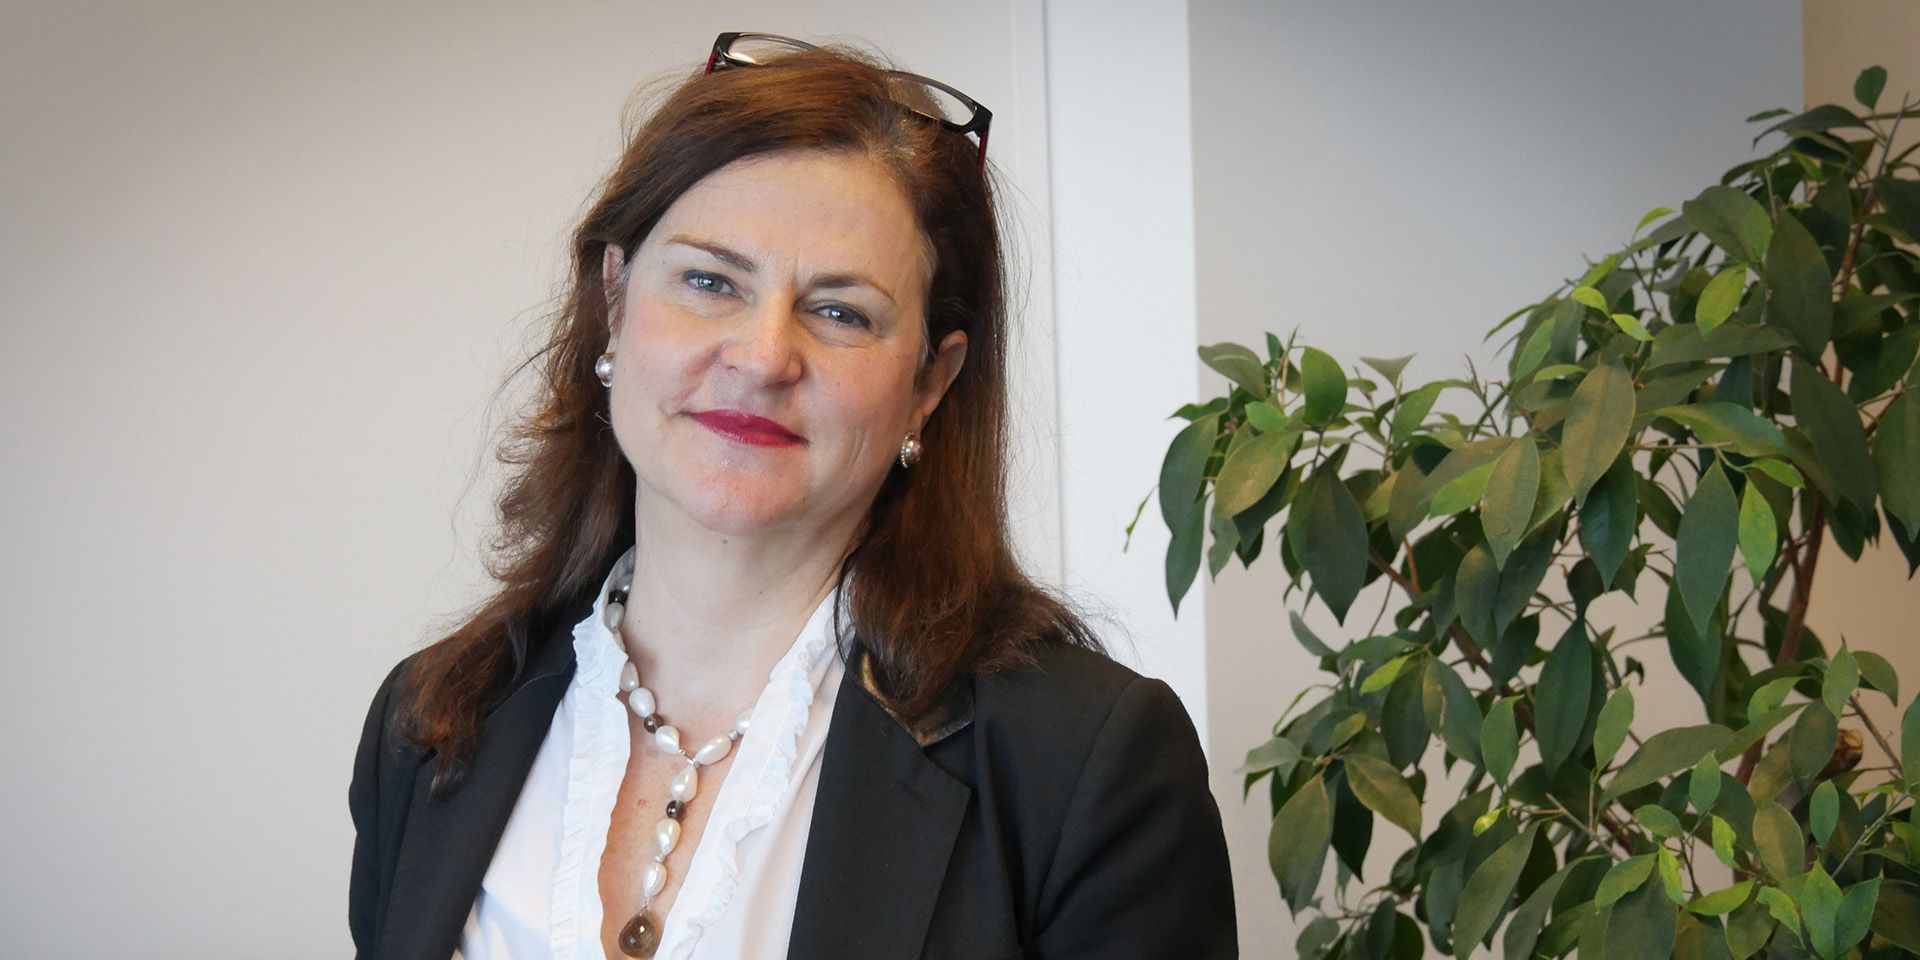 Portrait of Katarina Mathernova, ECÕs deputy director general of the Directorate General for Neighborhood and Enlargement Negotiations, picture made in 2016.Portrait of Katarina Mathernova, ECÕs deputy director general of the Directorate General for Neighborhood and Enlargement Negotiations.Portrait of Katarina Mathernova, ECÕs deputy director general of the Directorate General for Neighborhood and Enlargement Negotiations.